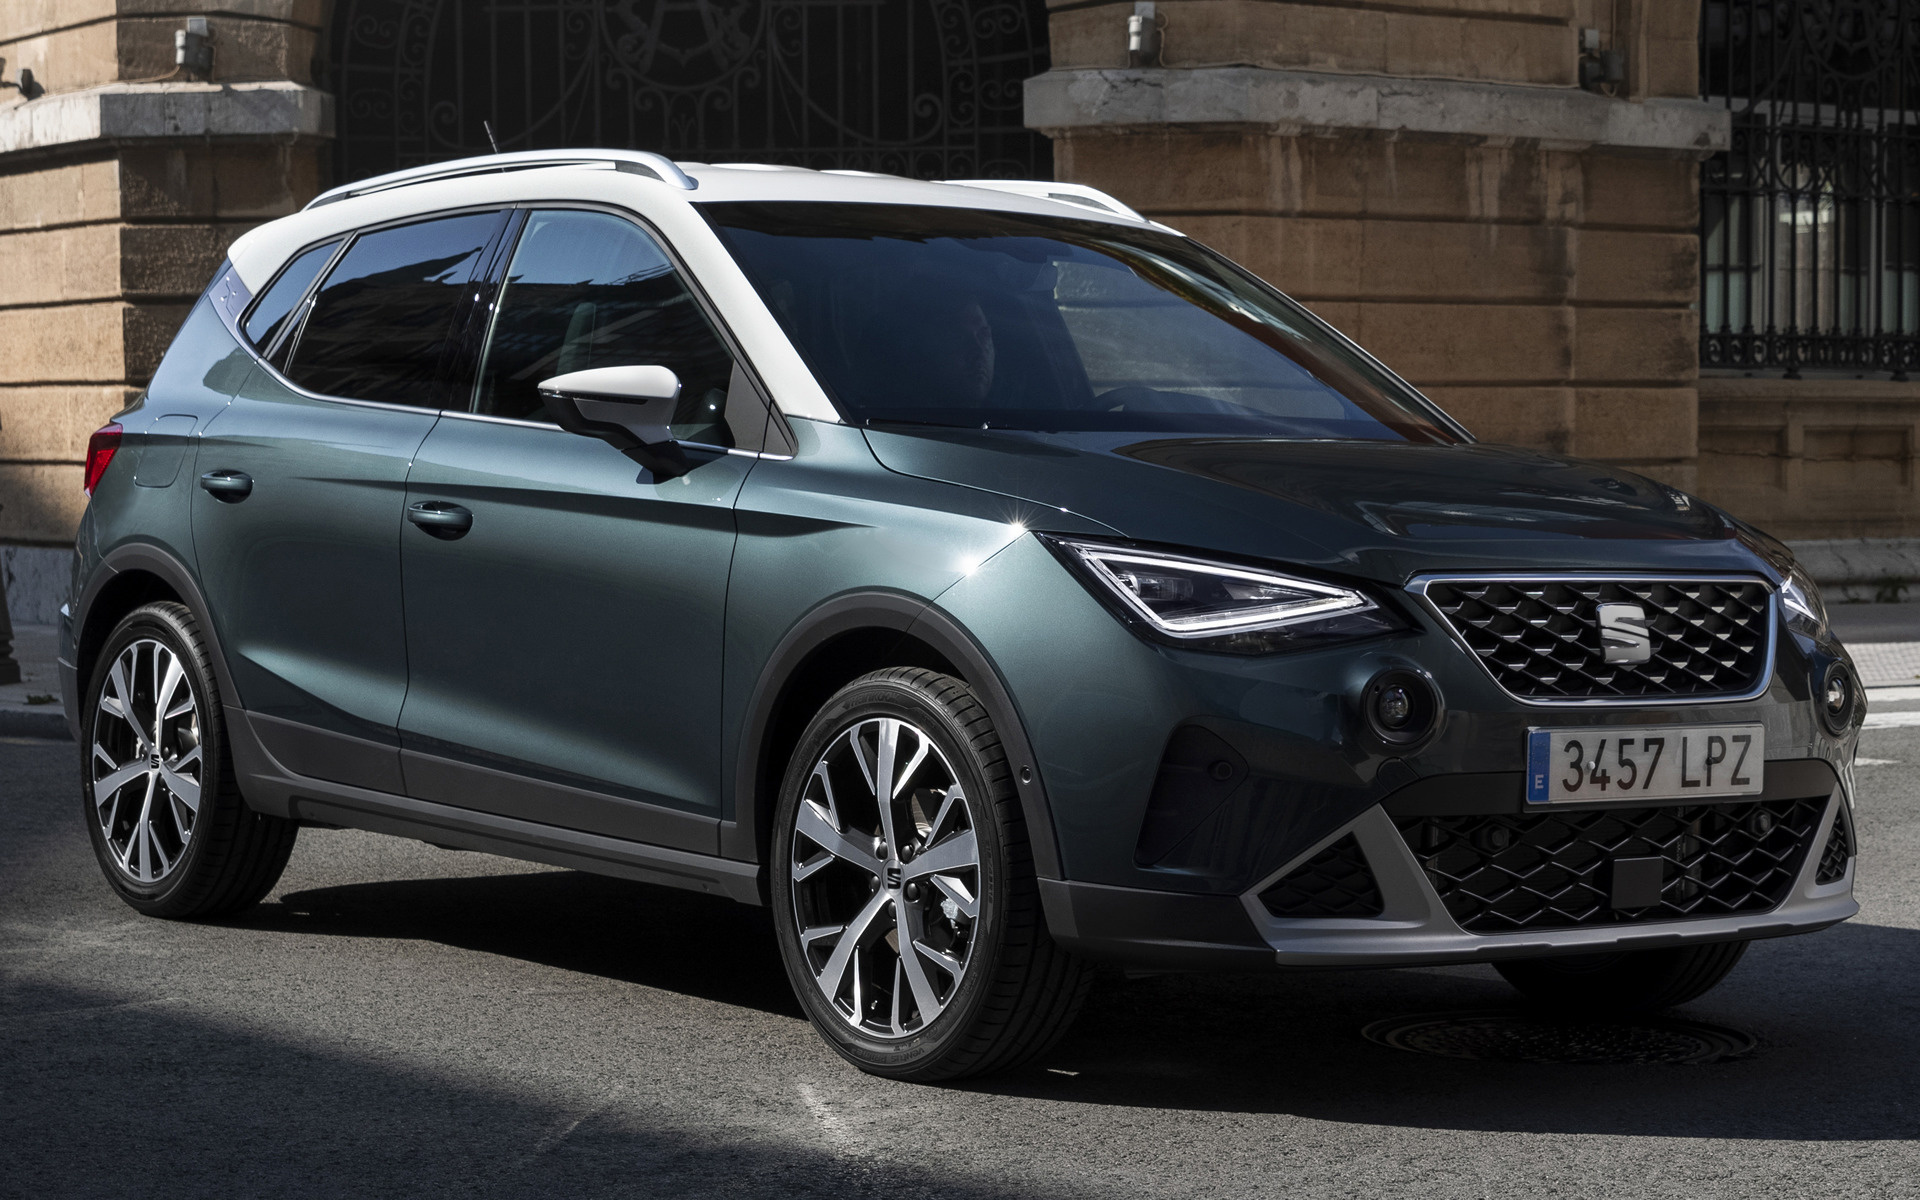 2021 Seat Arona - Wallpapers and HD Images